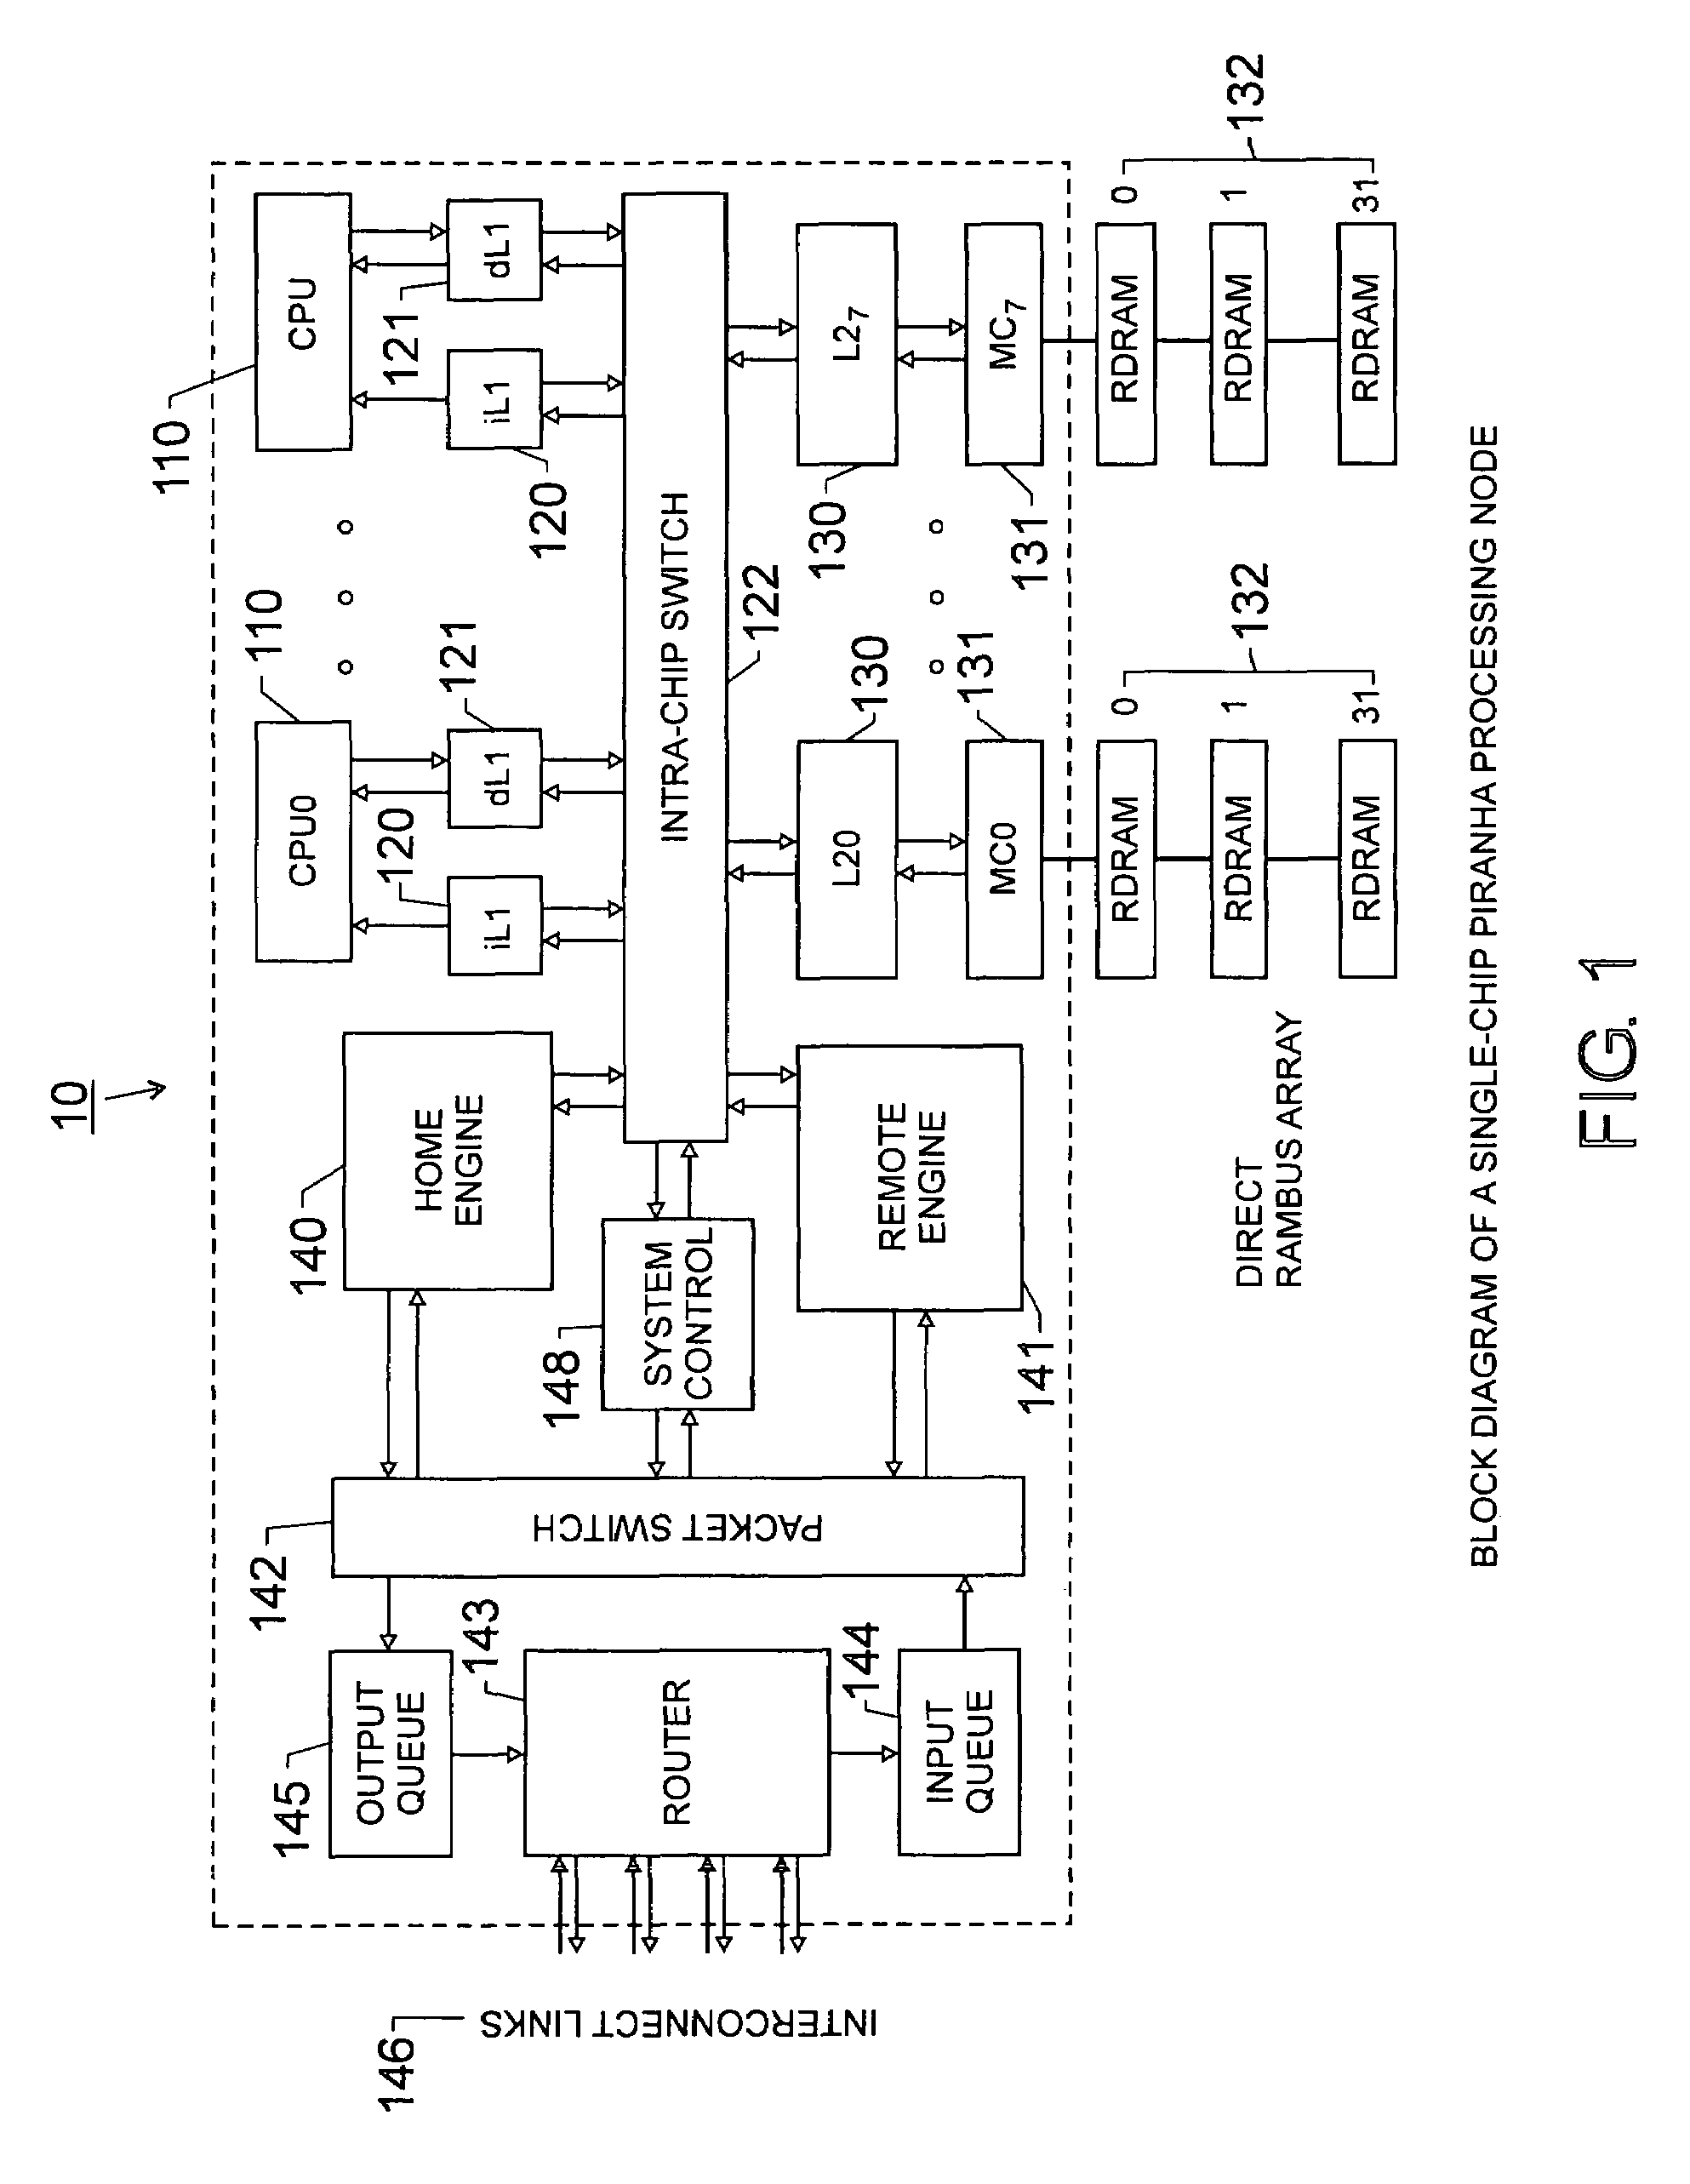 Scalable architecture based on single-chip multiprocessing